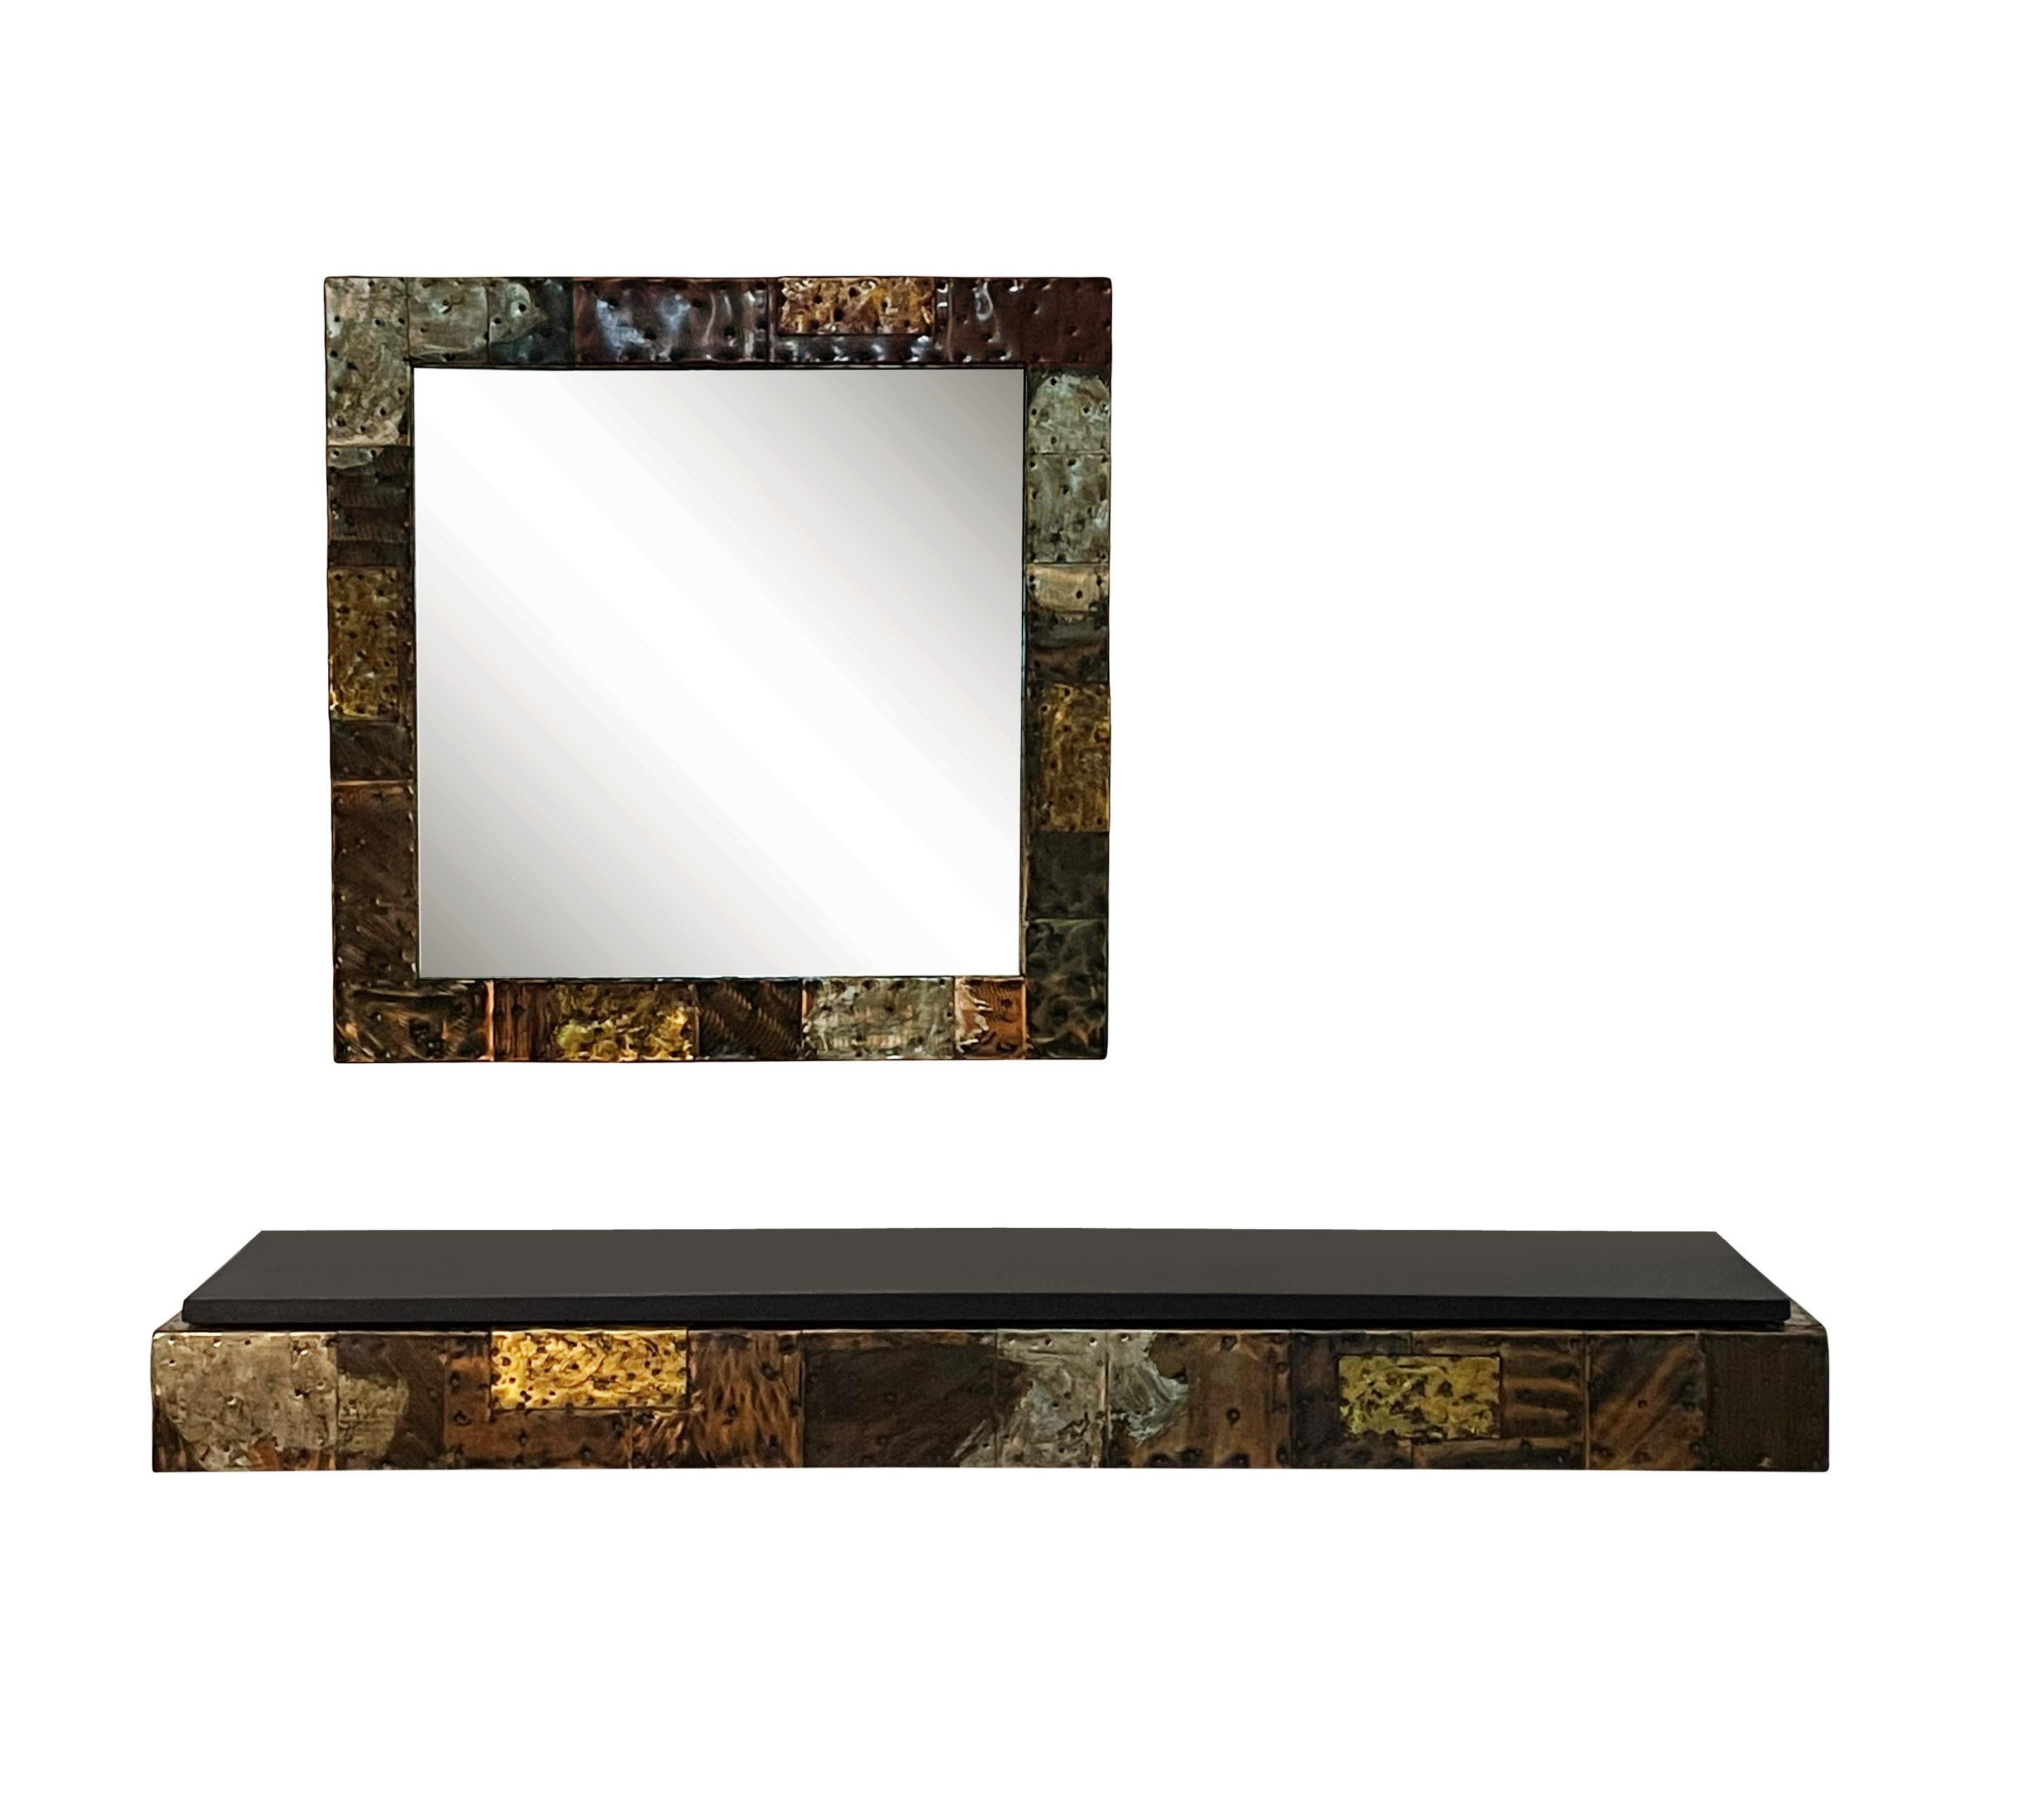 Paul Evans studio floating shelf and mirror set circa early 1970's. It features copper, bronze and pewter cladding in a patchwork design. Console shelf measures 60 x 13 x 6.5 inches with heavy black slate top. Mirror measures 30 inches. All in very